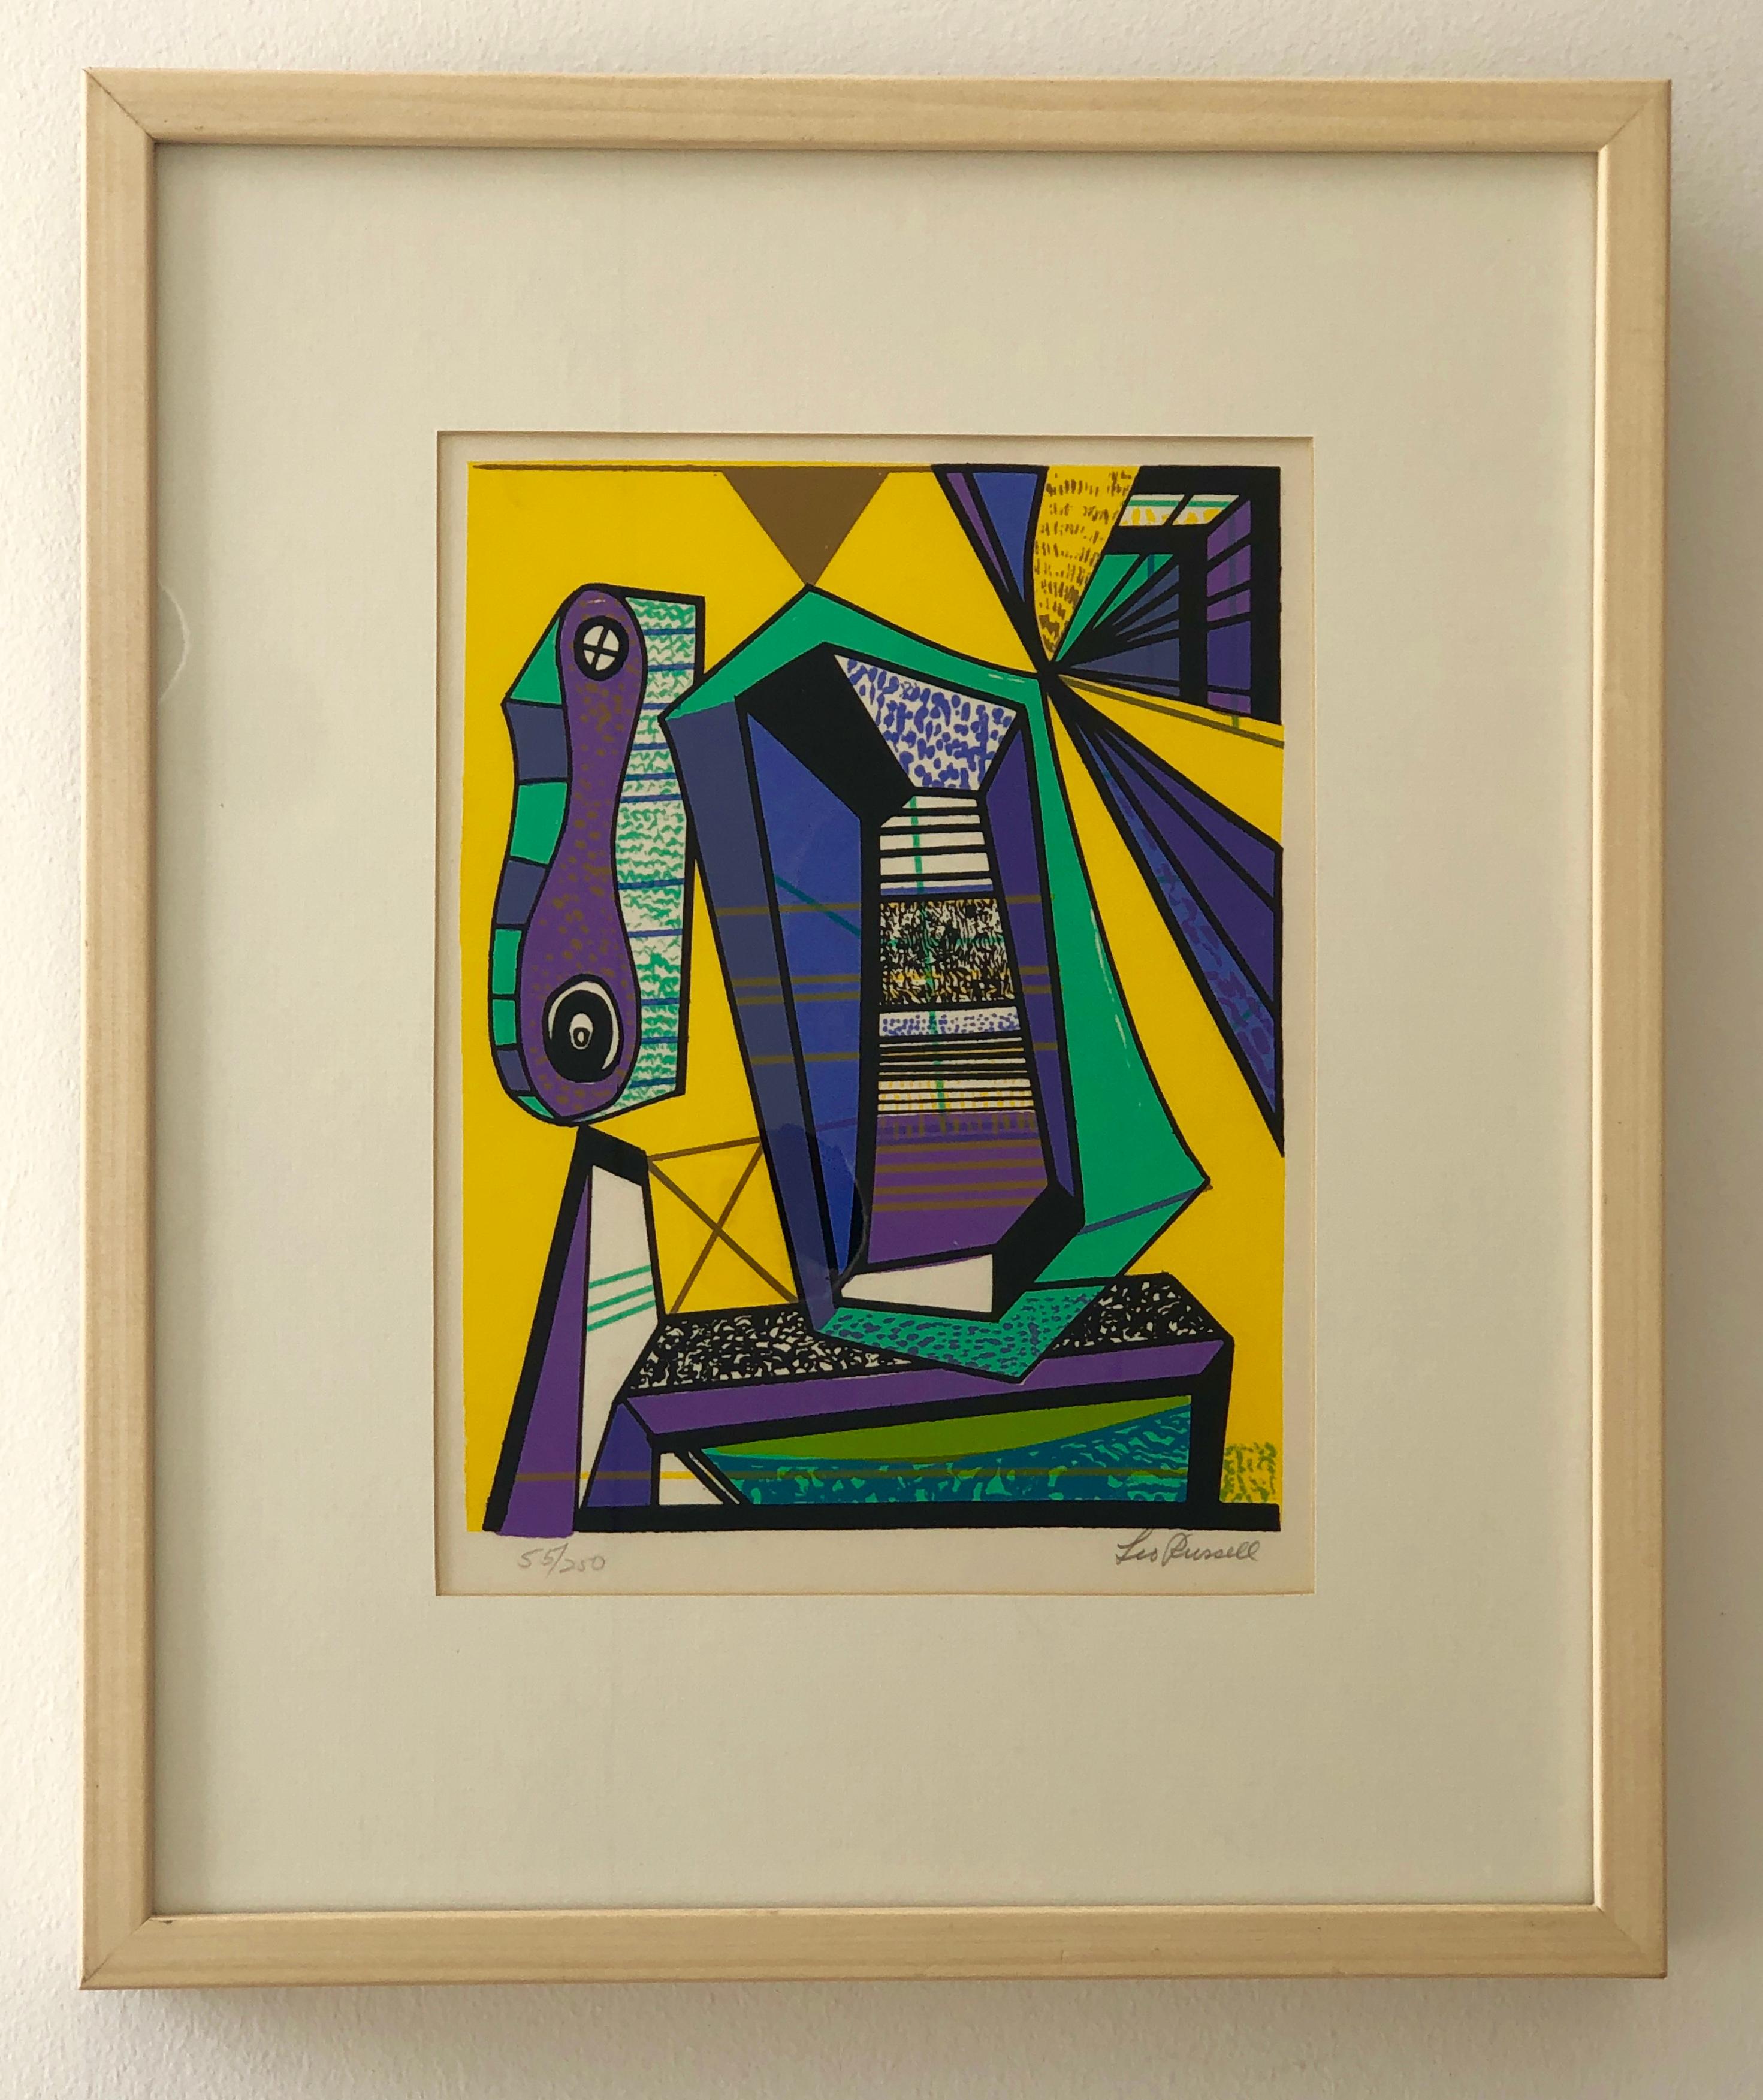 Offered is a pencil signed and numbered 55/250 Leo Russell Modernist abstract graphic print in bright yellow, purple, white, gray and black. The piece is framed in a blond wood and plexiglass frame. Even though this piece is considered abstract,